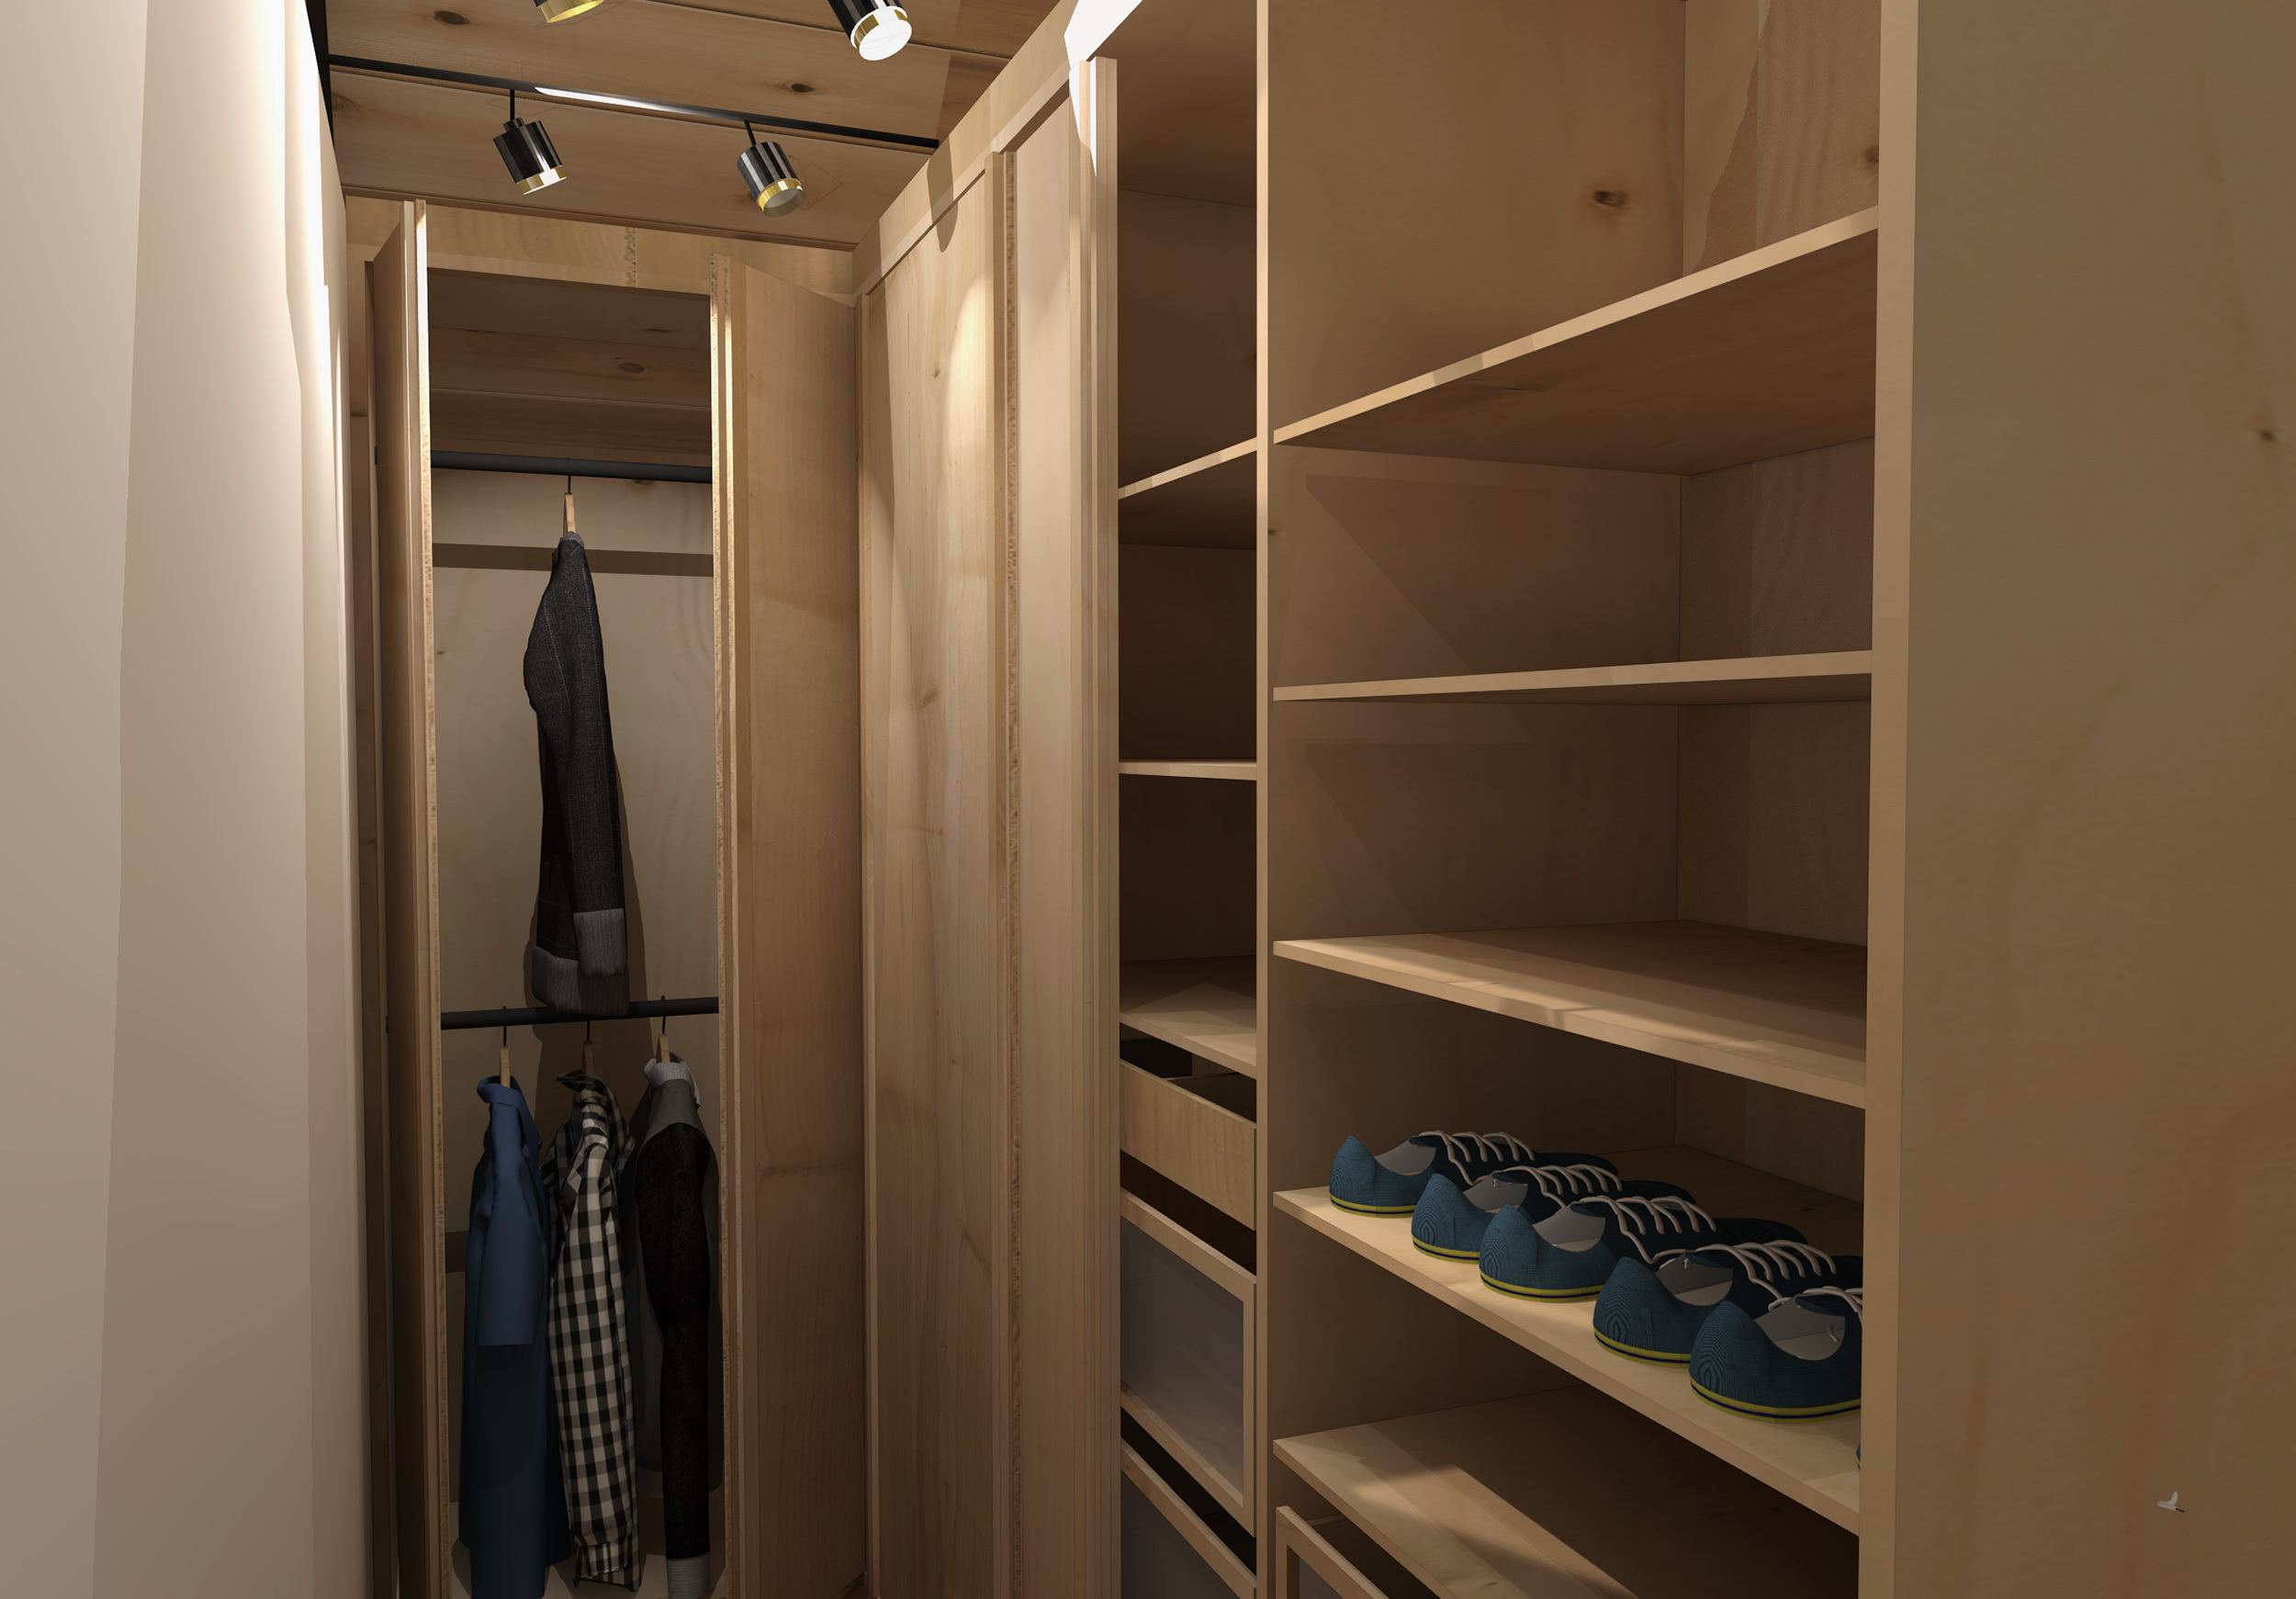 Cabinetmakers and closet designers now have an affordable